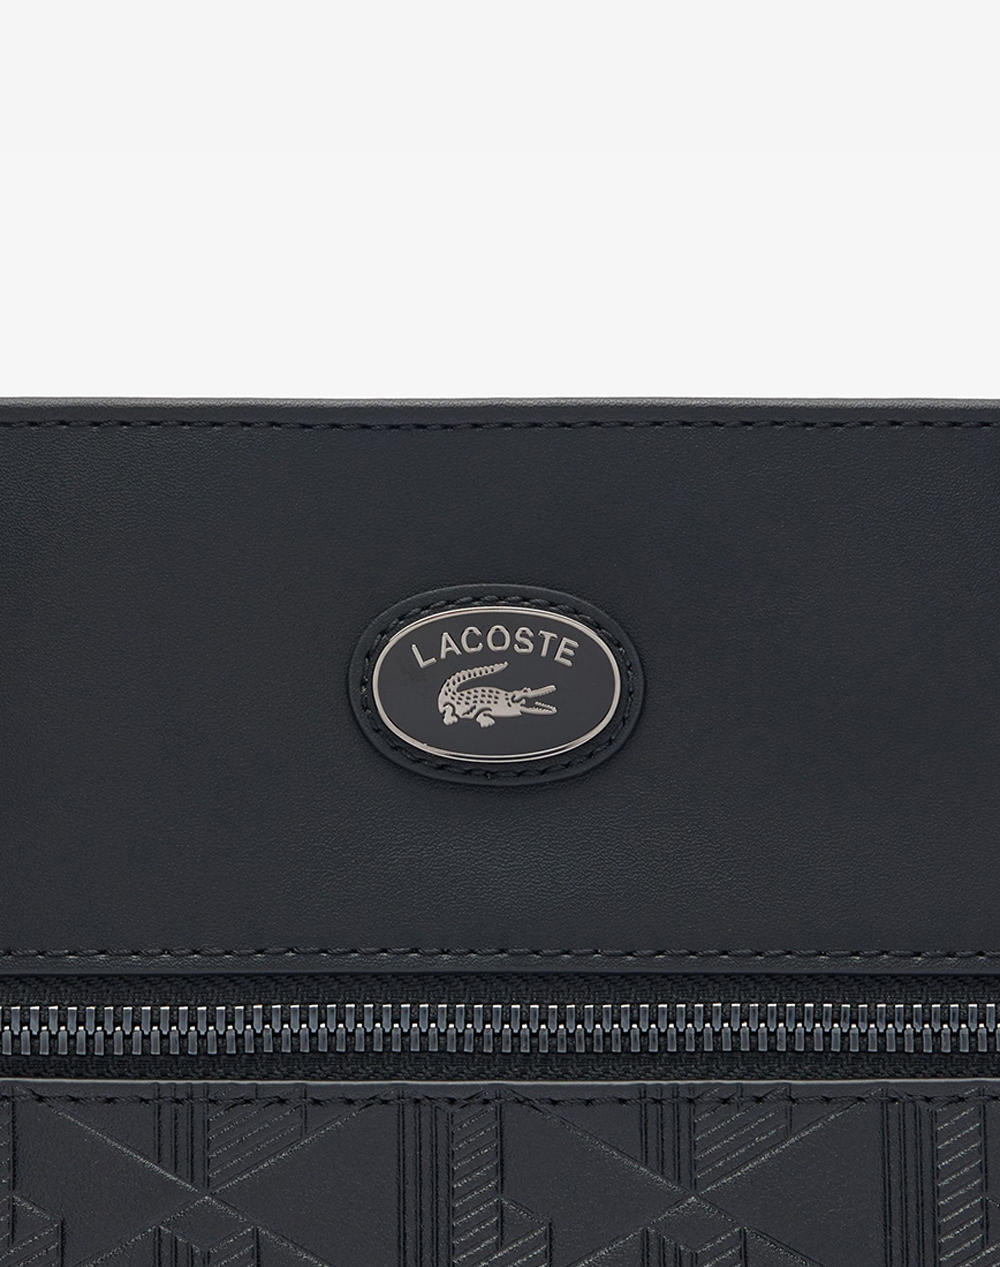 LACOSTE FLAT CROSSOVER BAG (Dimensions: 16 x 10.5 x 6 cm)